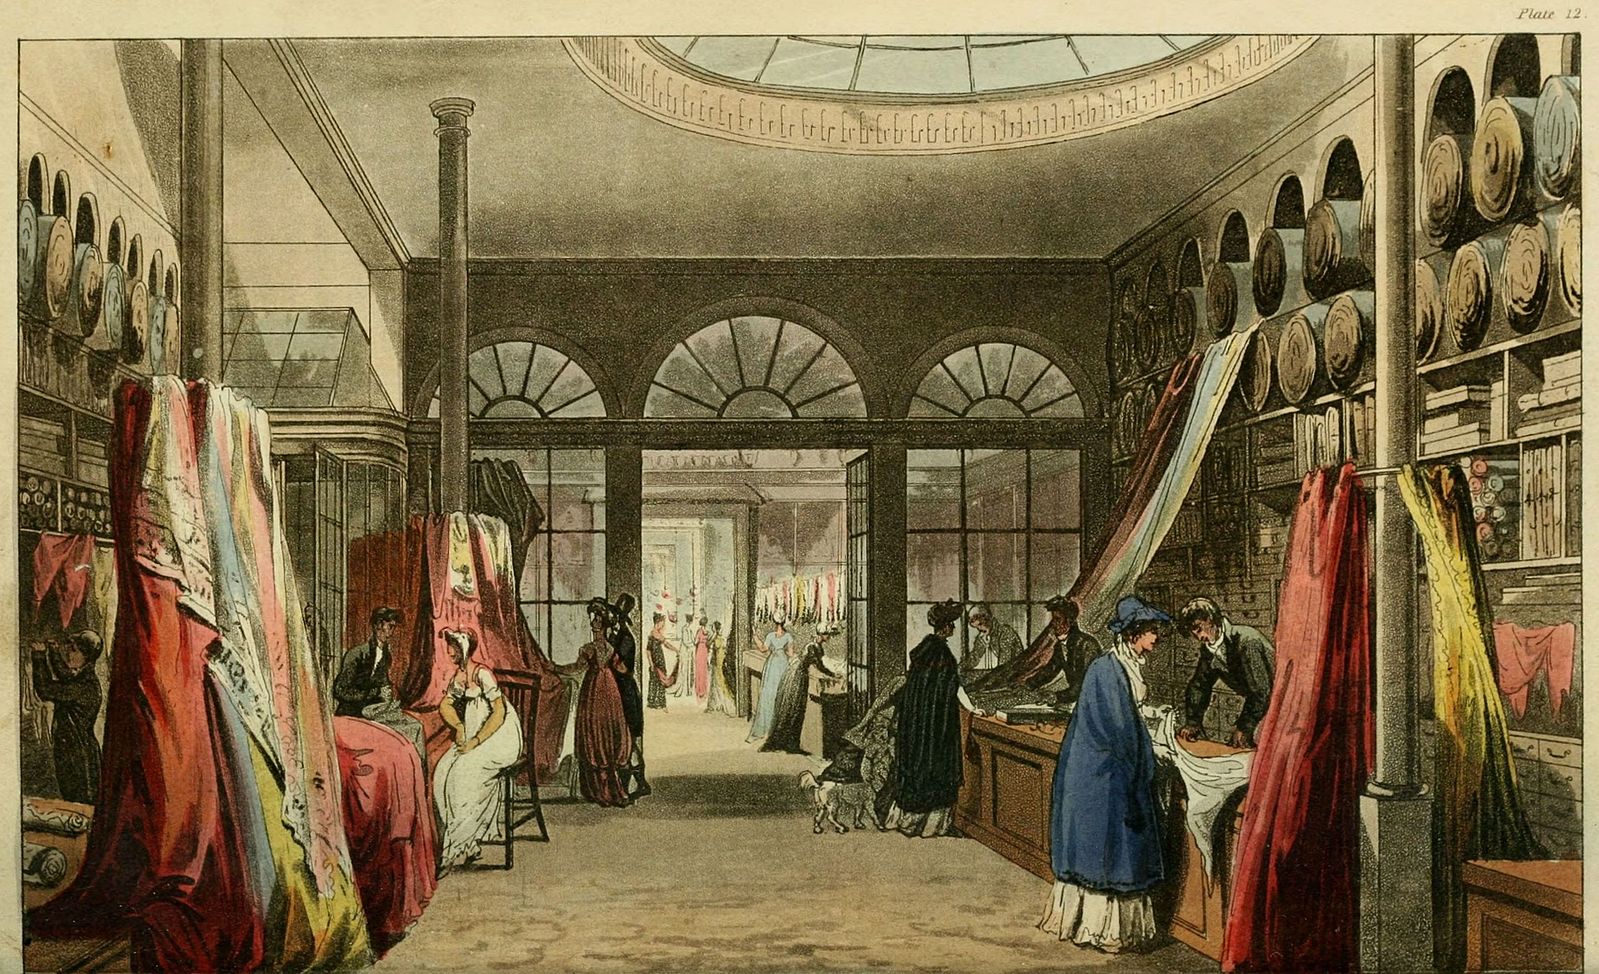 An 1809 illustration show the inside of the Harding, Howell & Co’s Grand Fashionable Magazine premises